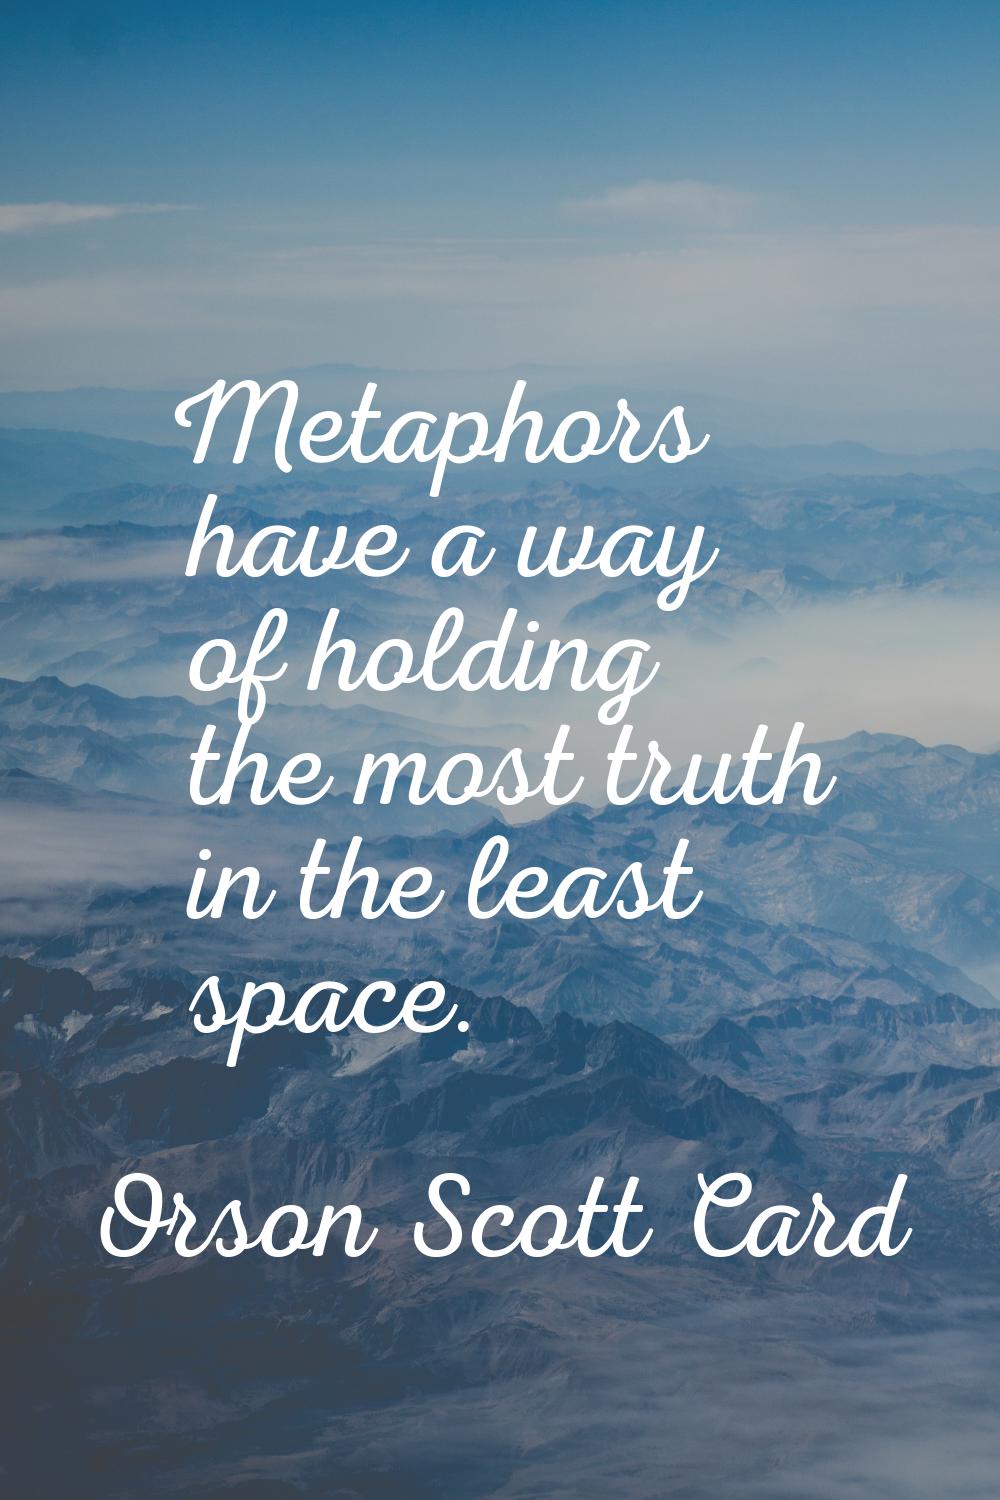 Metaphors have a way of holding the most truth in the least space.